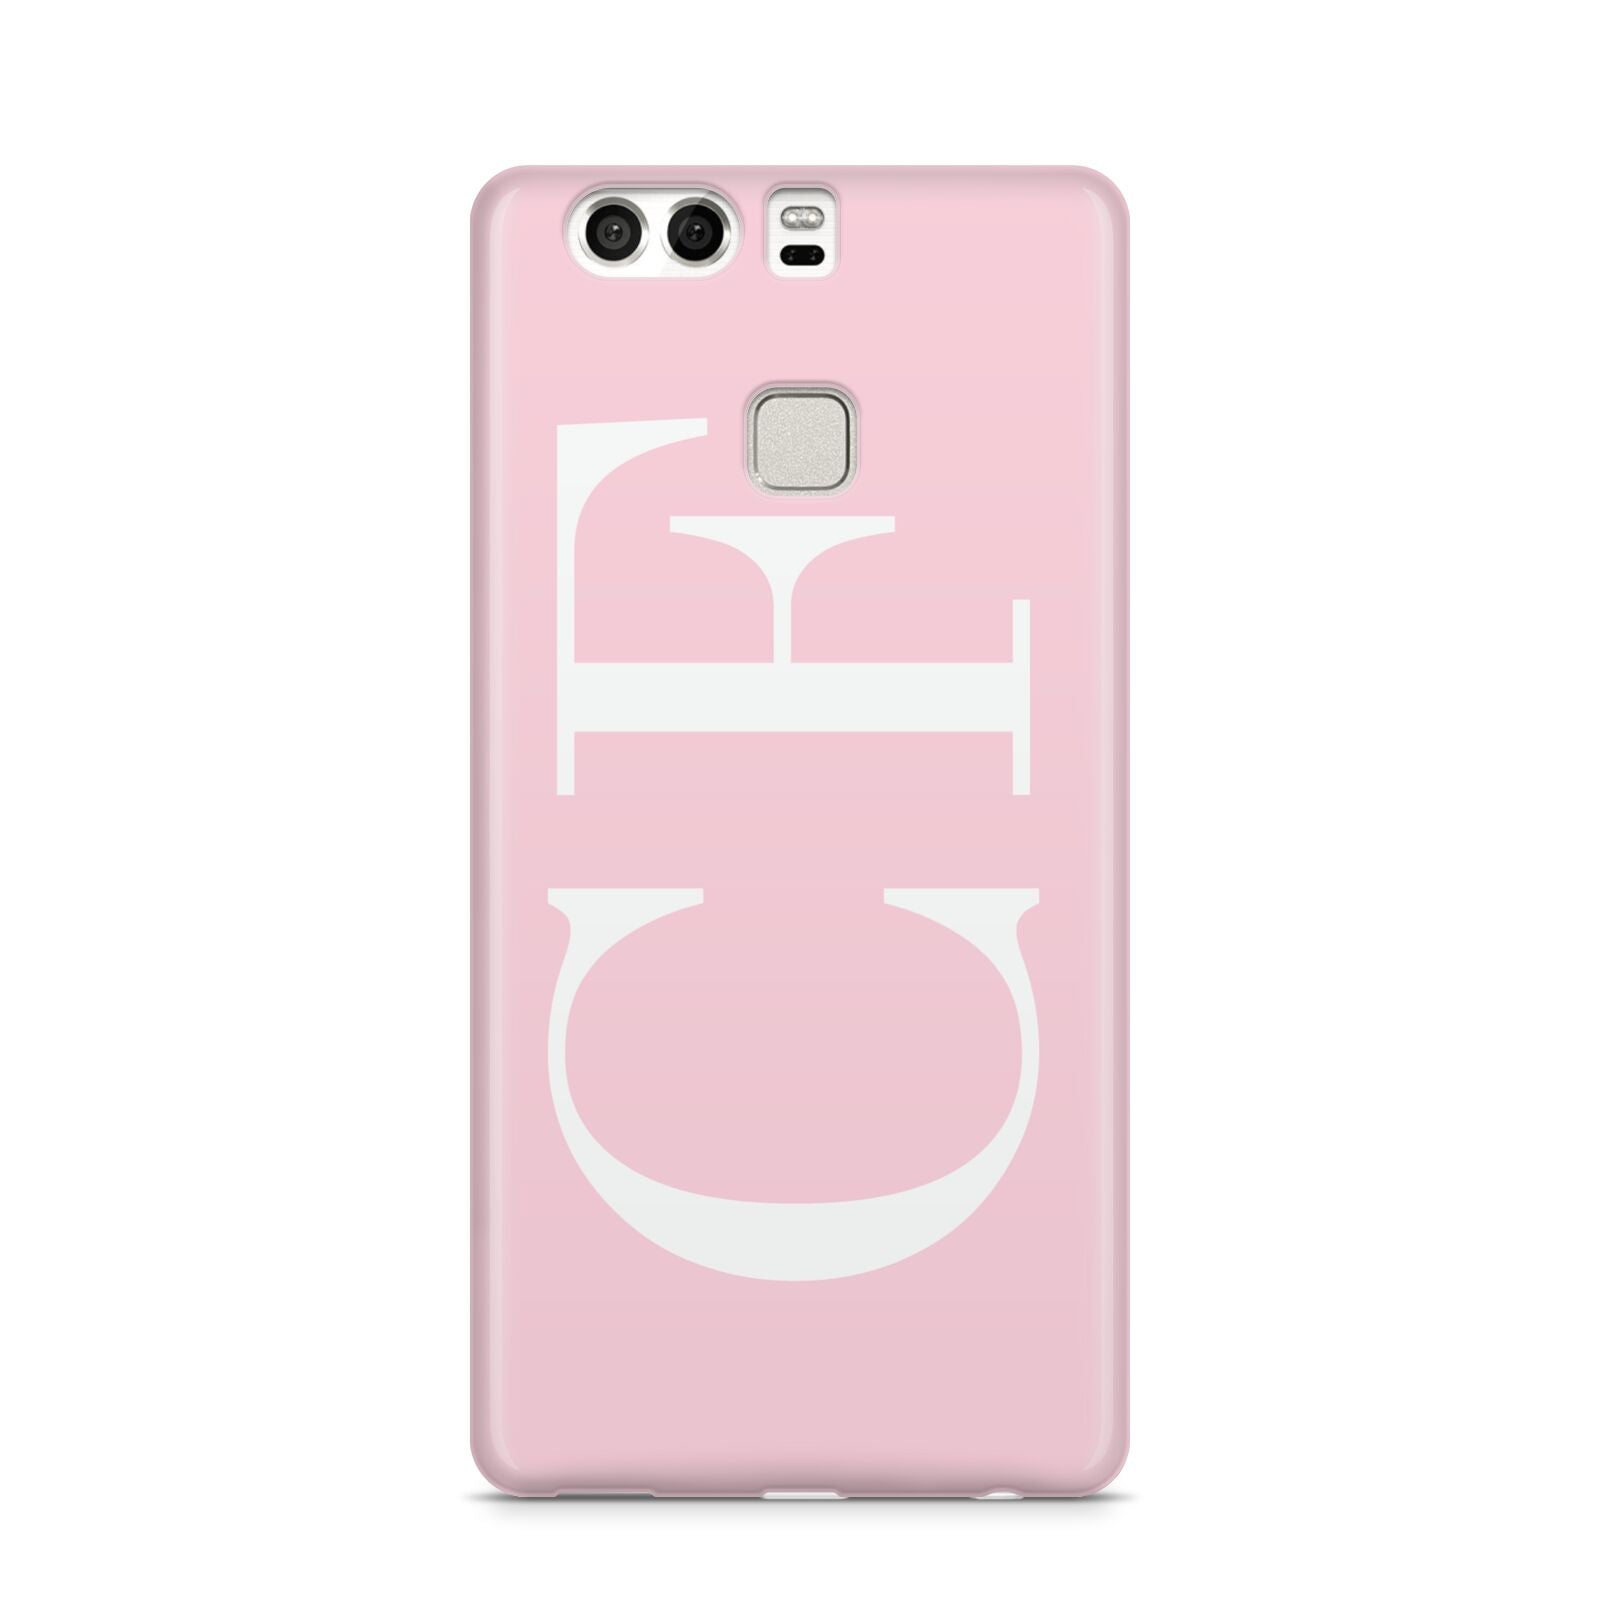 Personalised Pink White Side Initials Huawei P9 Case